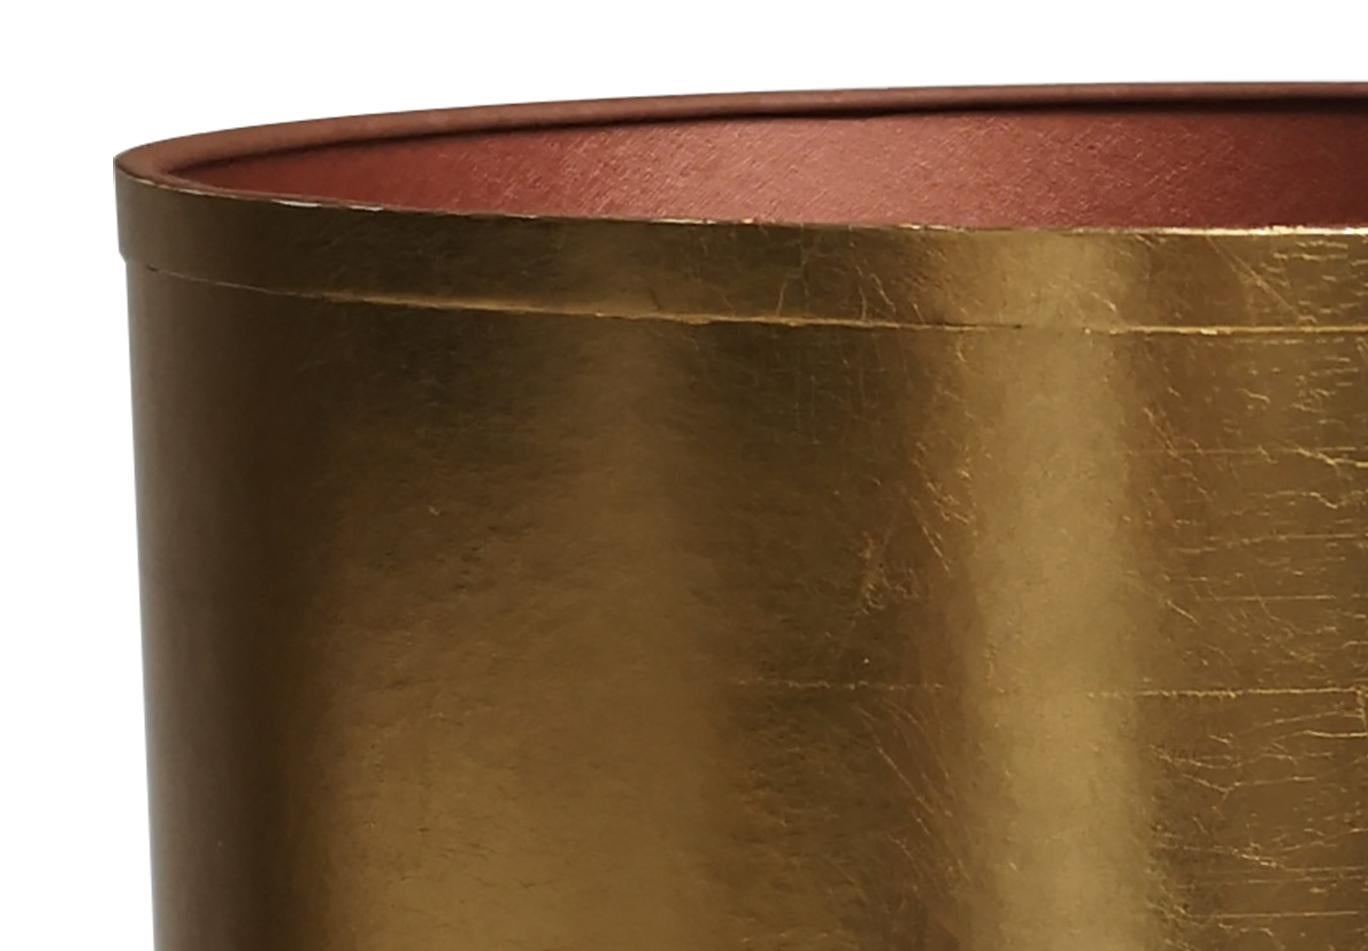 Pair of this Bitossi lamp features a ceramic base with a bronze glaze in the middle and bands of shiny metallic gold glaze at the top and bottom. Bitossi, Italy, circa 1960s. With an exceptional new custom made shades by René Houben. With warm brown